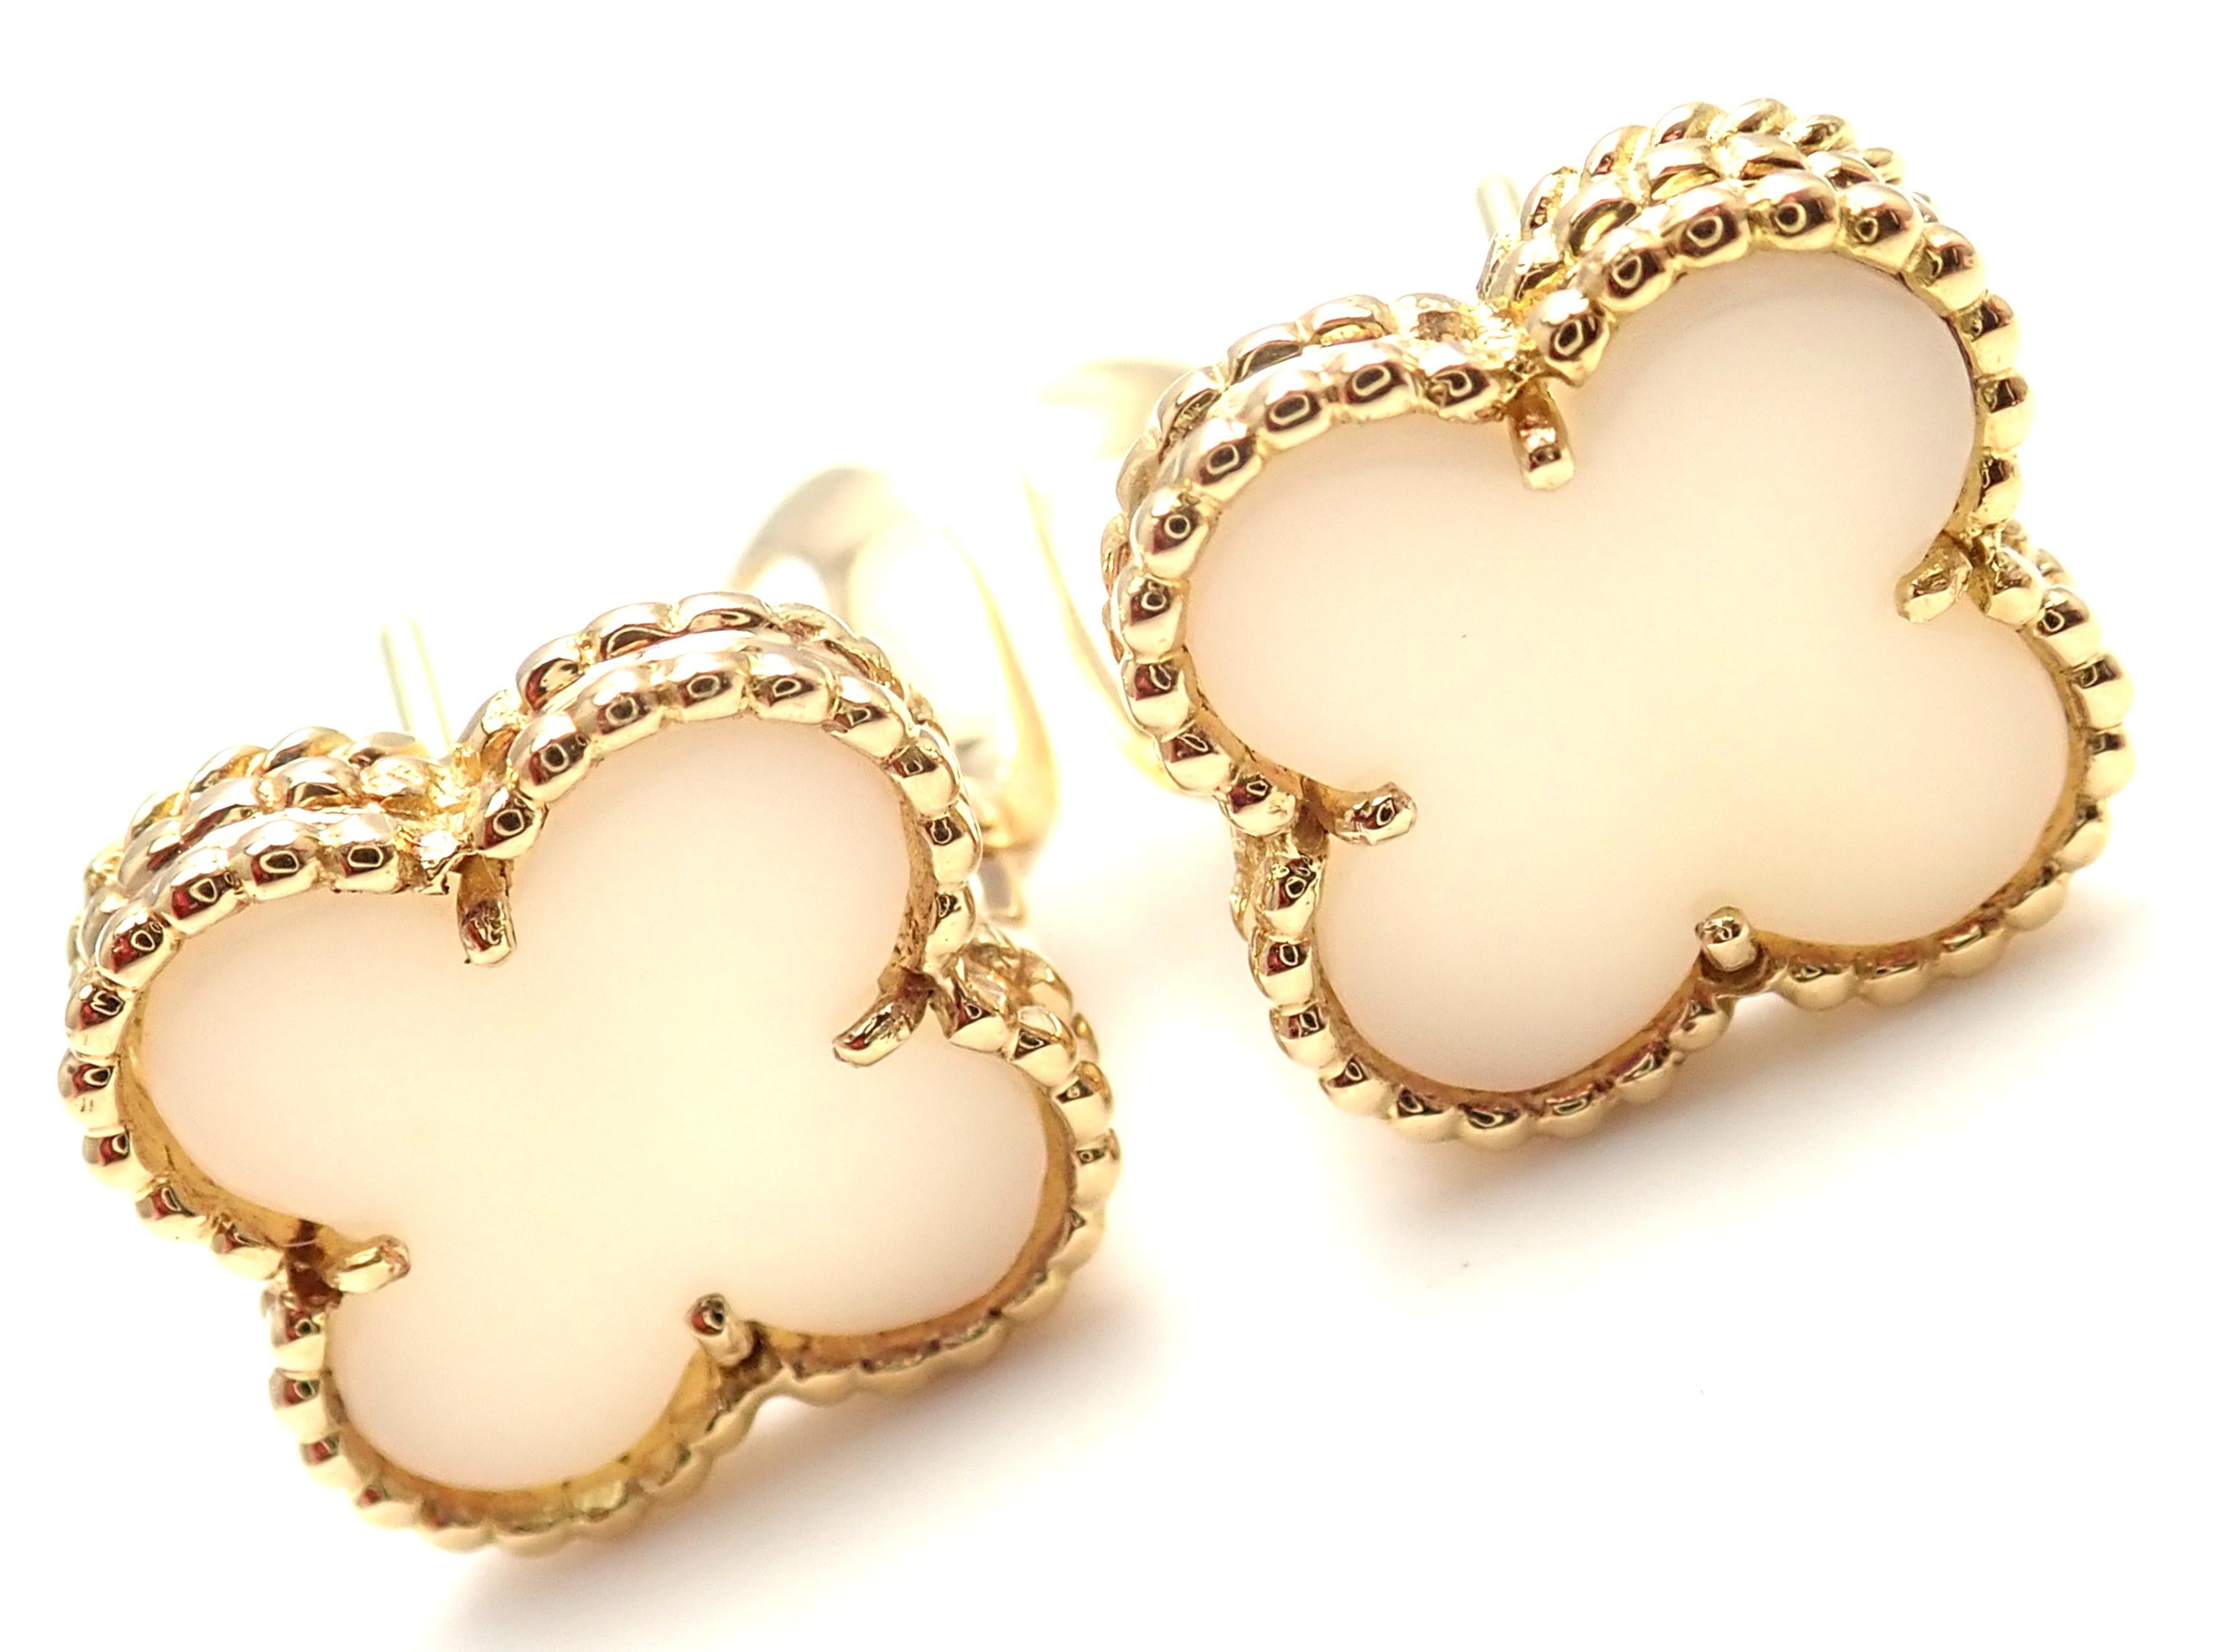 18k Yellow Gold Vintage Alhambra White Coral Earrings by Van Cleef & Arpels.  
With 2 alhambra shape white coral stones: 15mm each. 
These earrings are made for pierced ears.
These earrings come with service paper from VCA store in Japan.
Details: 